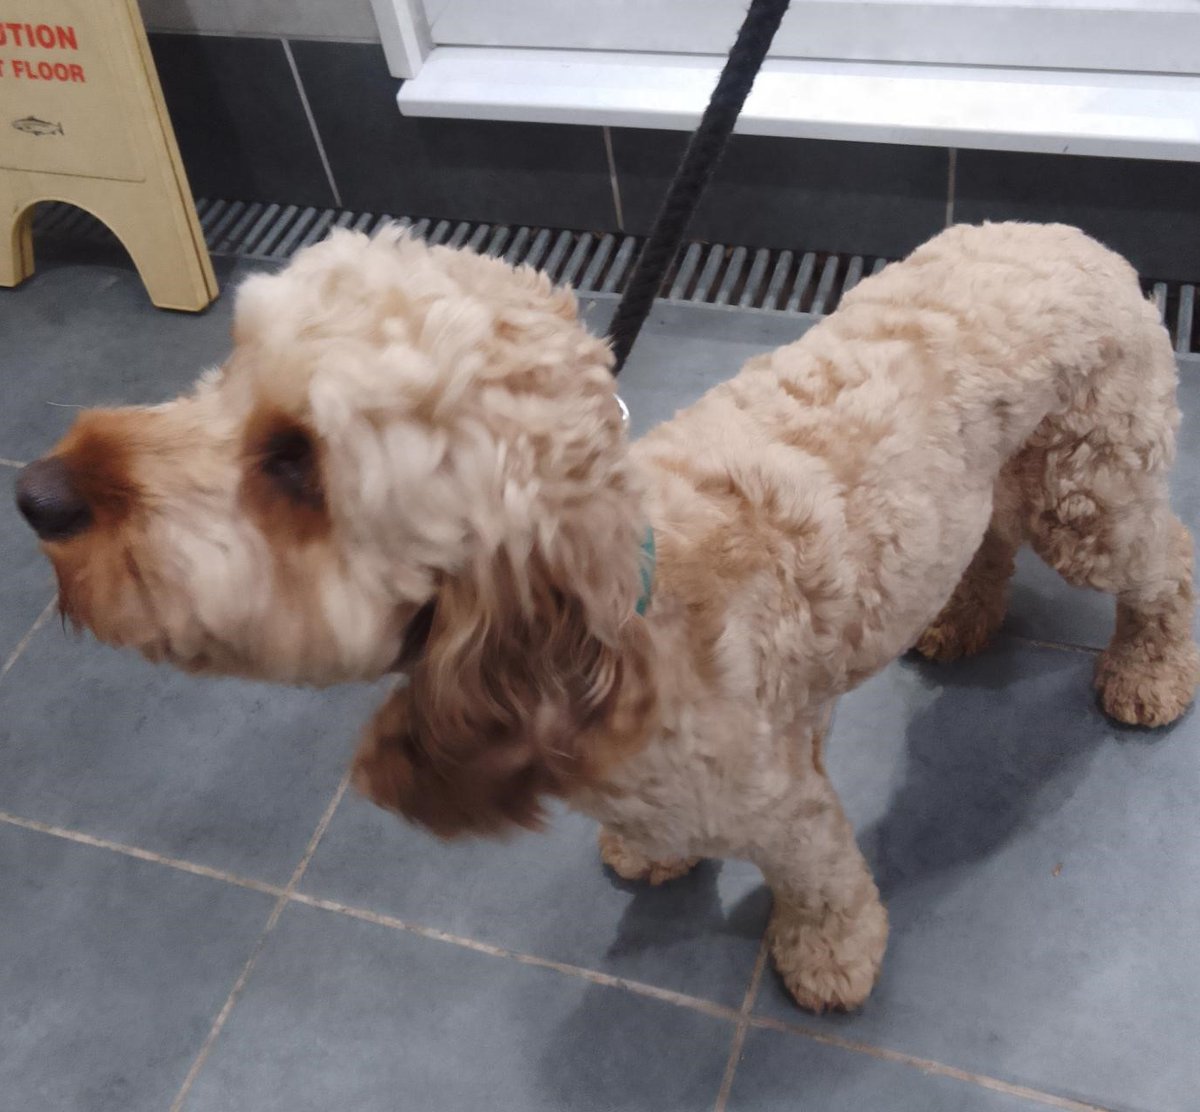 Please retweet to help FIND THE OWNER OR A RESCUE SPACE FOR THIS  STRAY DOG FOUND #CRANLEIGH #WAVERLEY  #GUILDFORD #SURREY #UK 
Male, Cockapoo, chip not registered. Found APRIL 17. Now in a council pound, he could be missing or stolen from another region, please share widely🐶✅